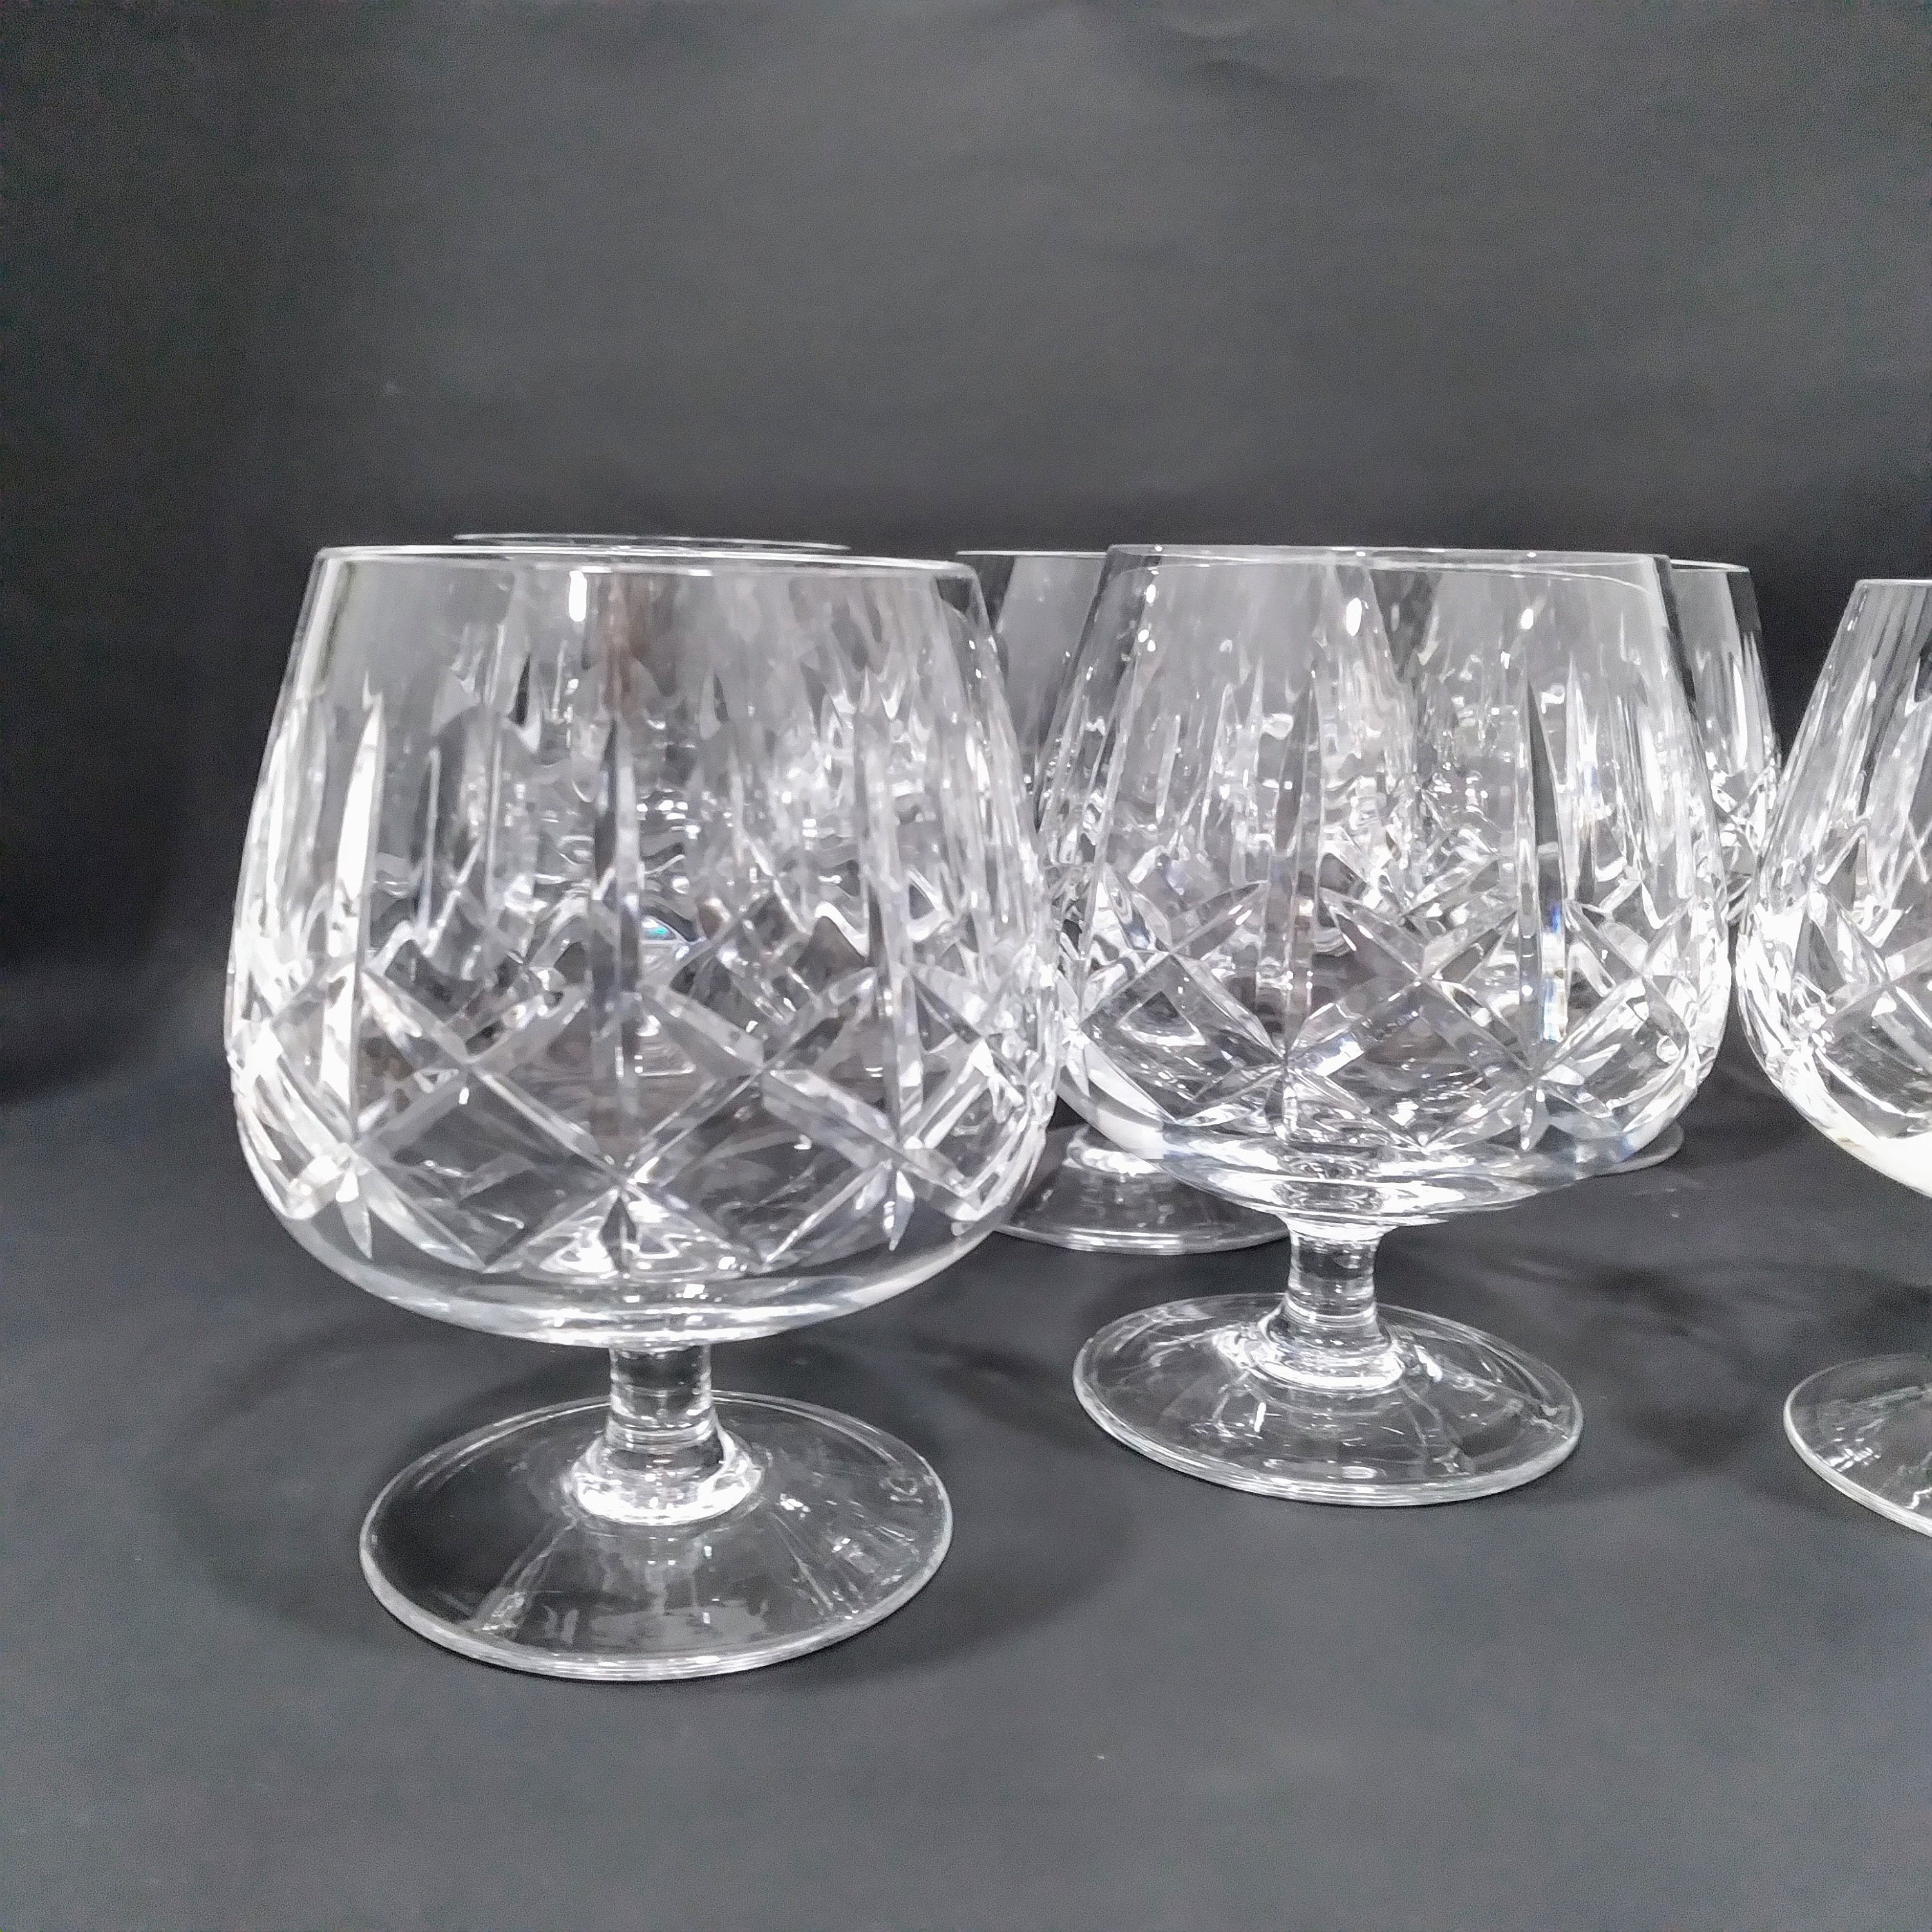 Waterford Crystal Lismore Brandy Snifters Set of 2 Glasses With